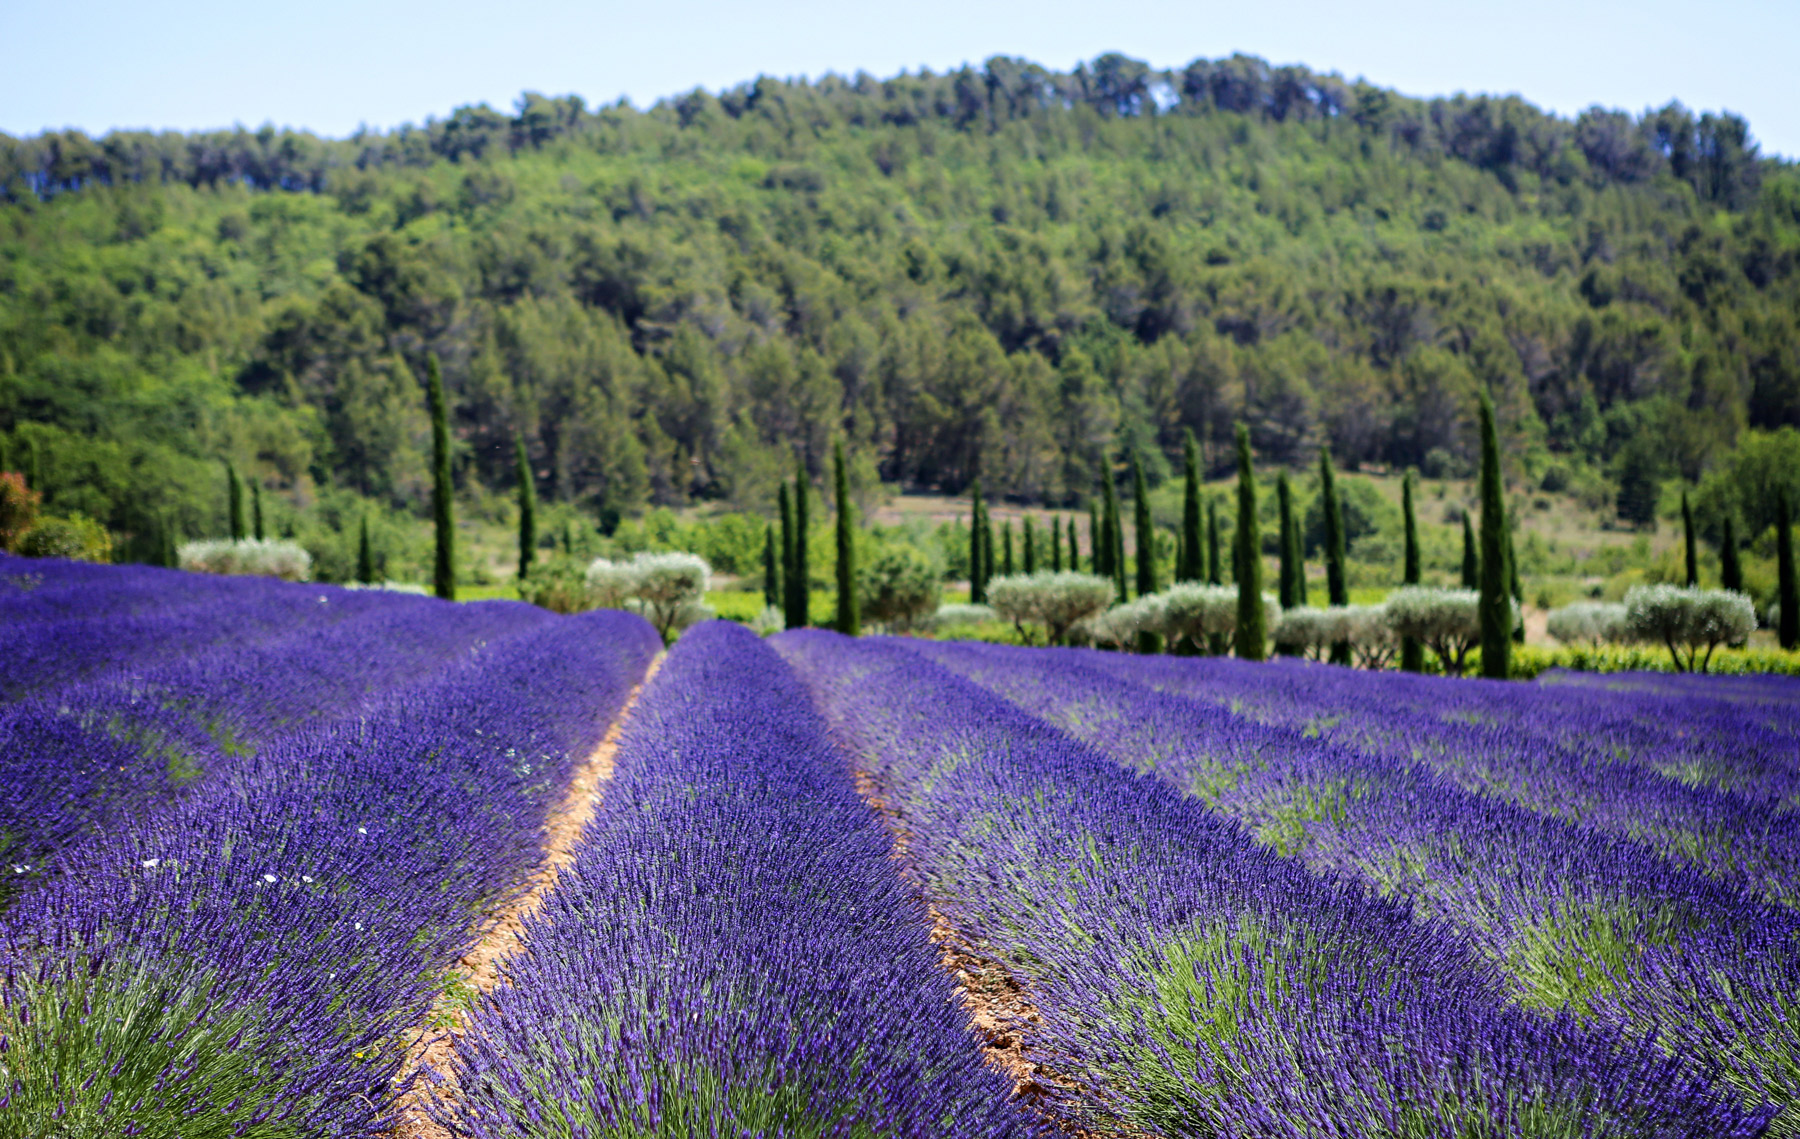 Join our wine and food trip to Provence for an unforgettable experience